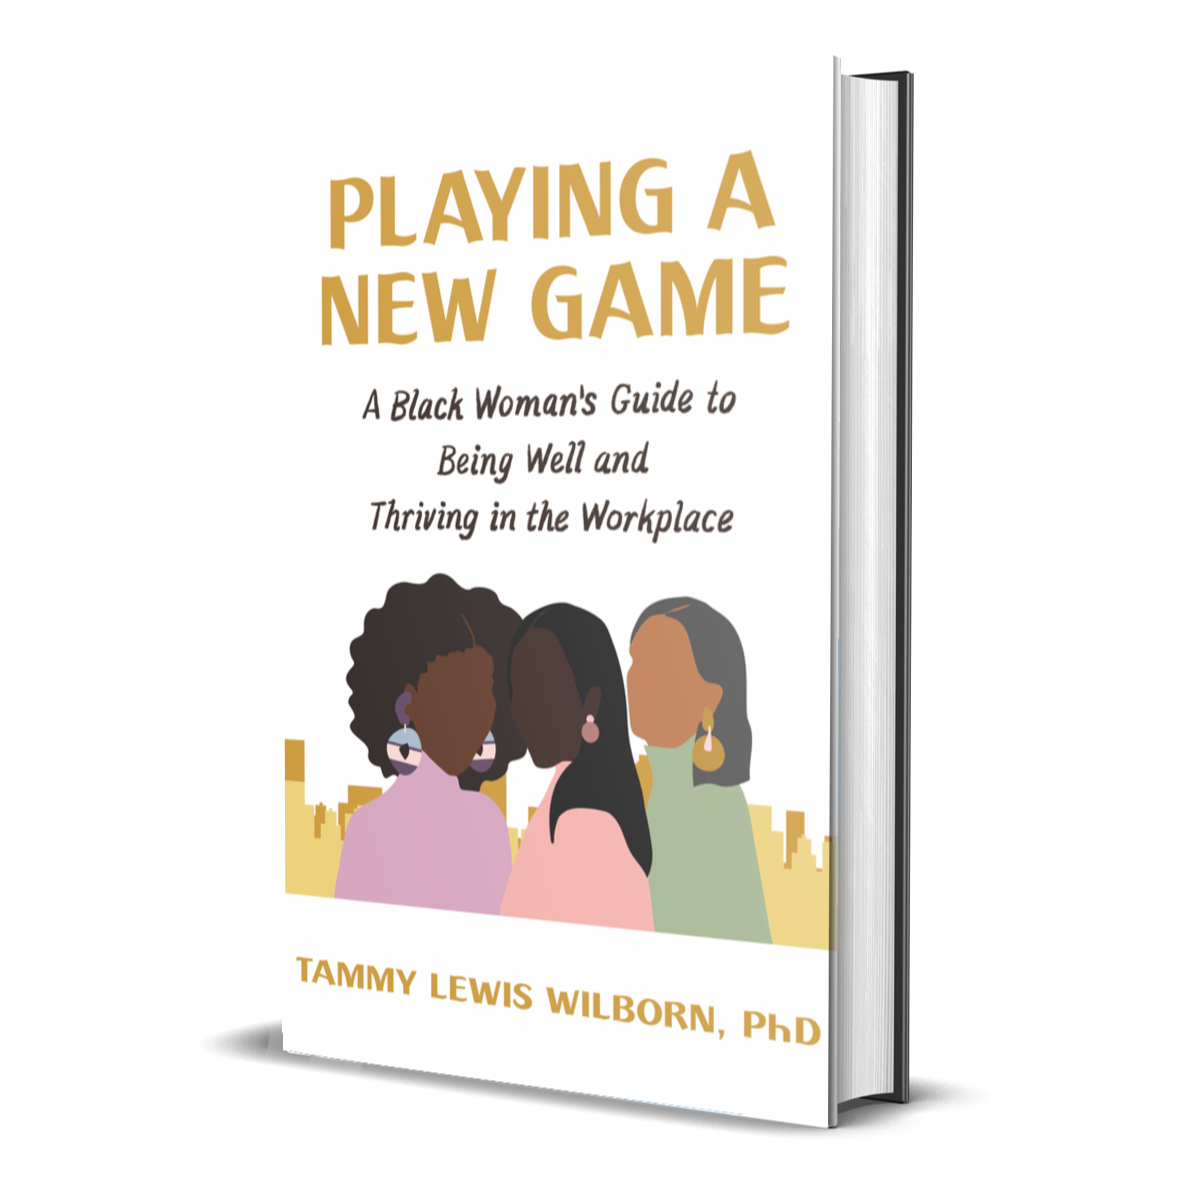 Dr. Tammy Lewis Wilborn | PLAYING A NEW GAME: A BLACK WOMAN'S GUIDE TO BEING WELL AND THRIVING IN THE WORKPLACE